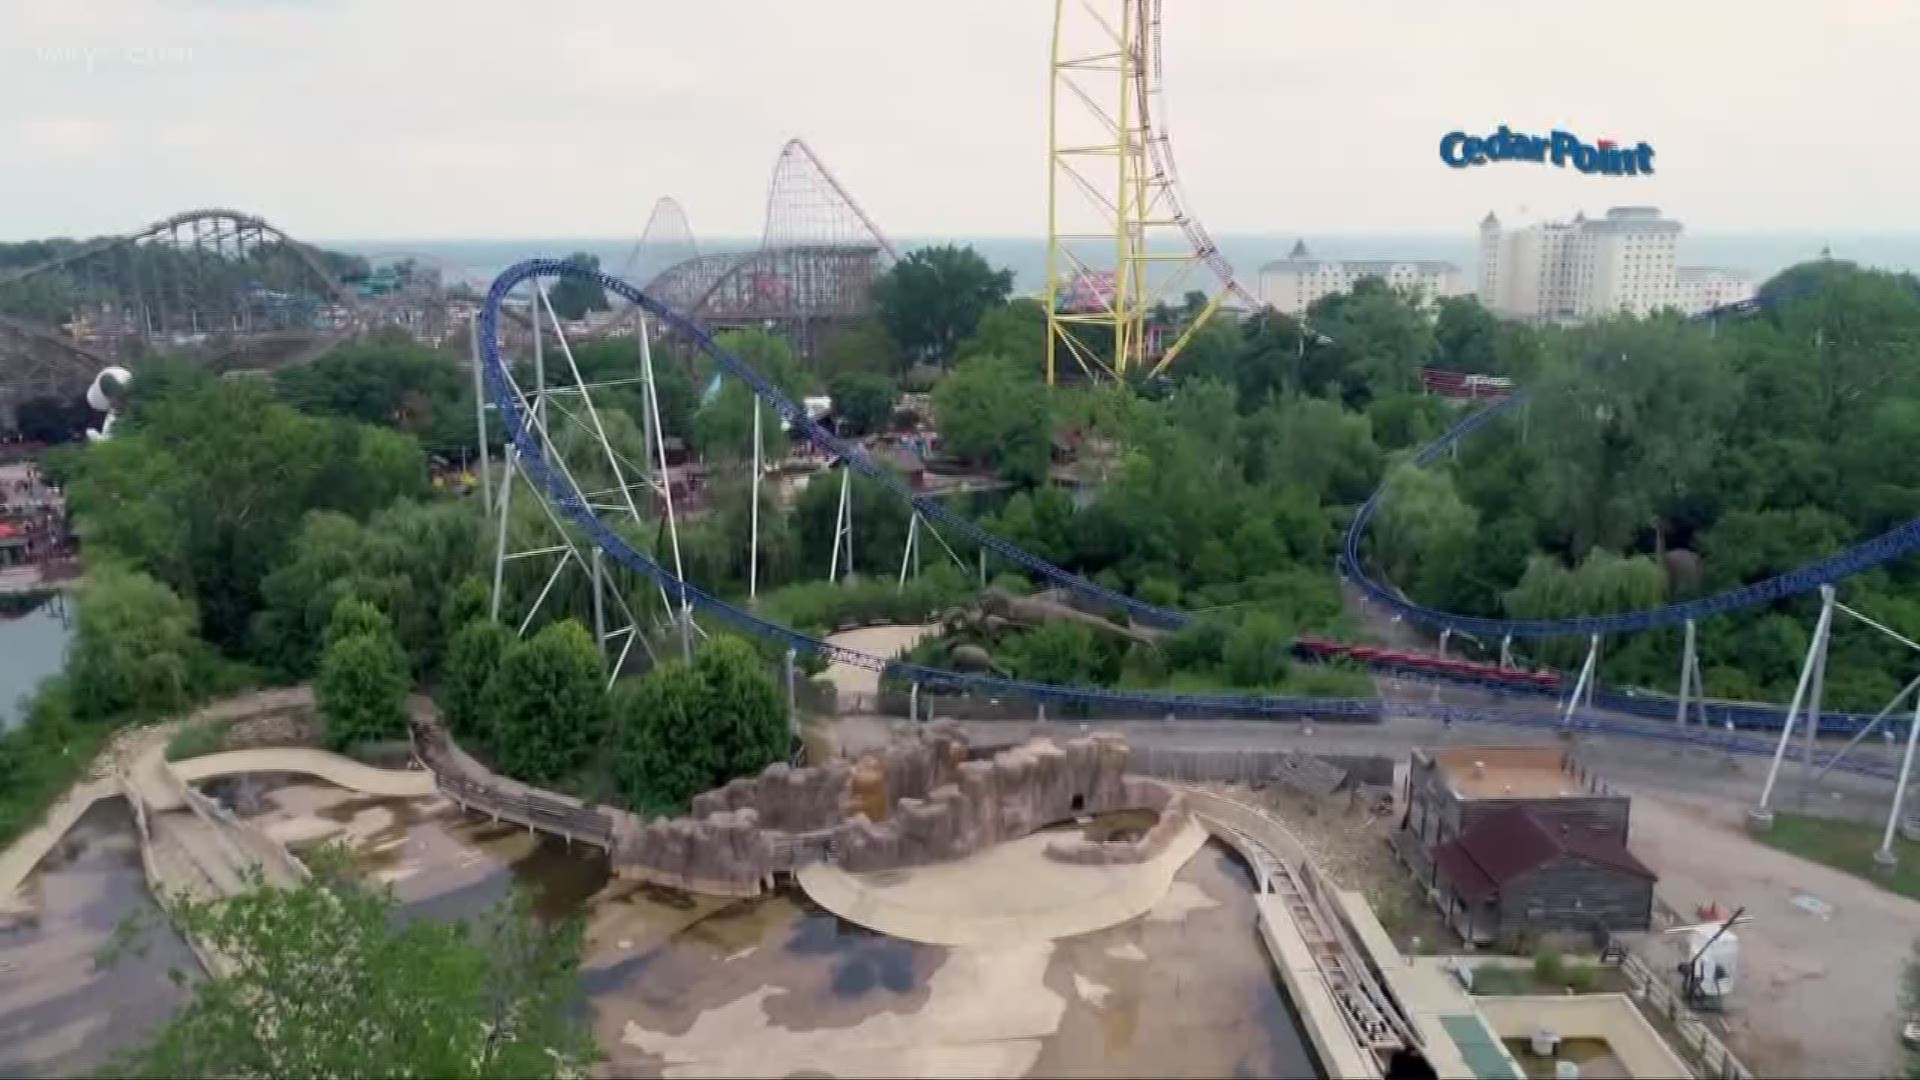 Cedar Point is taking things to the next level as the park celebrates its 150th anniversary next summer.